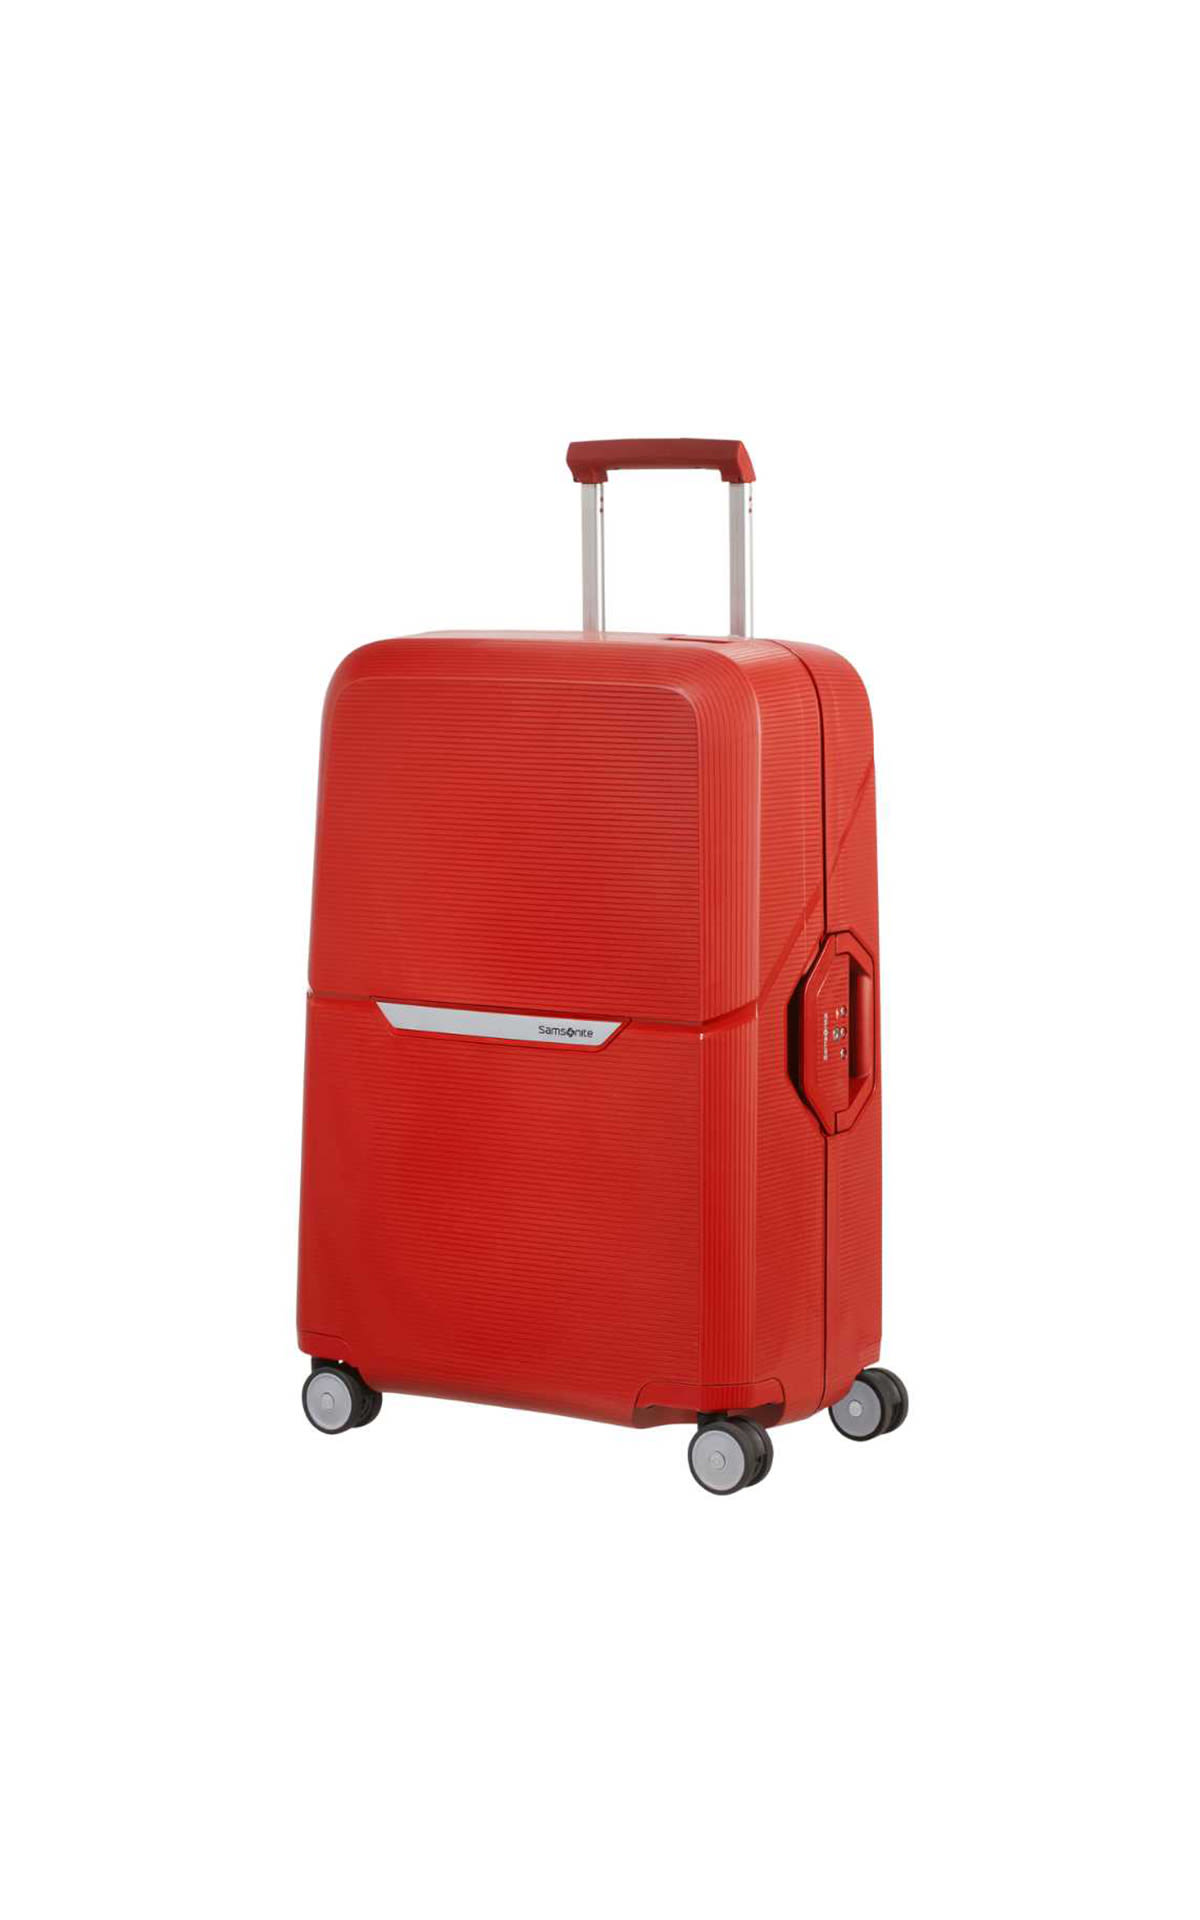 Magnum Spinner red suitcase